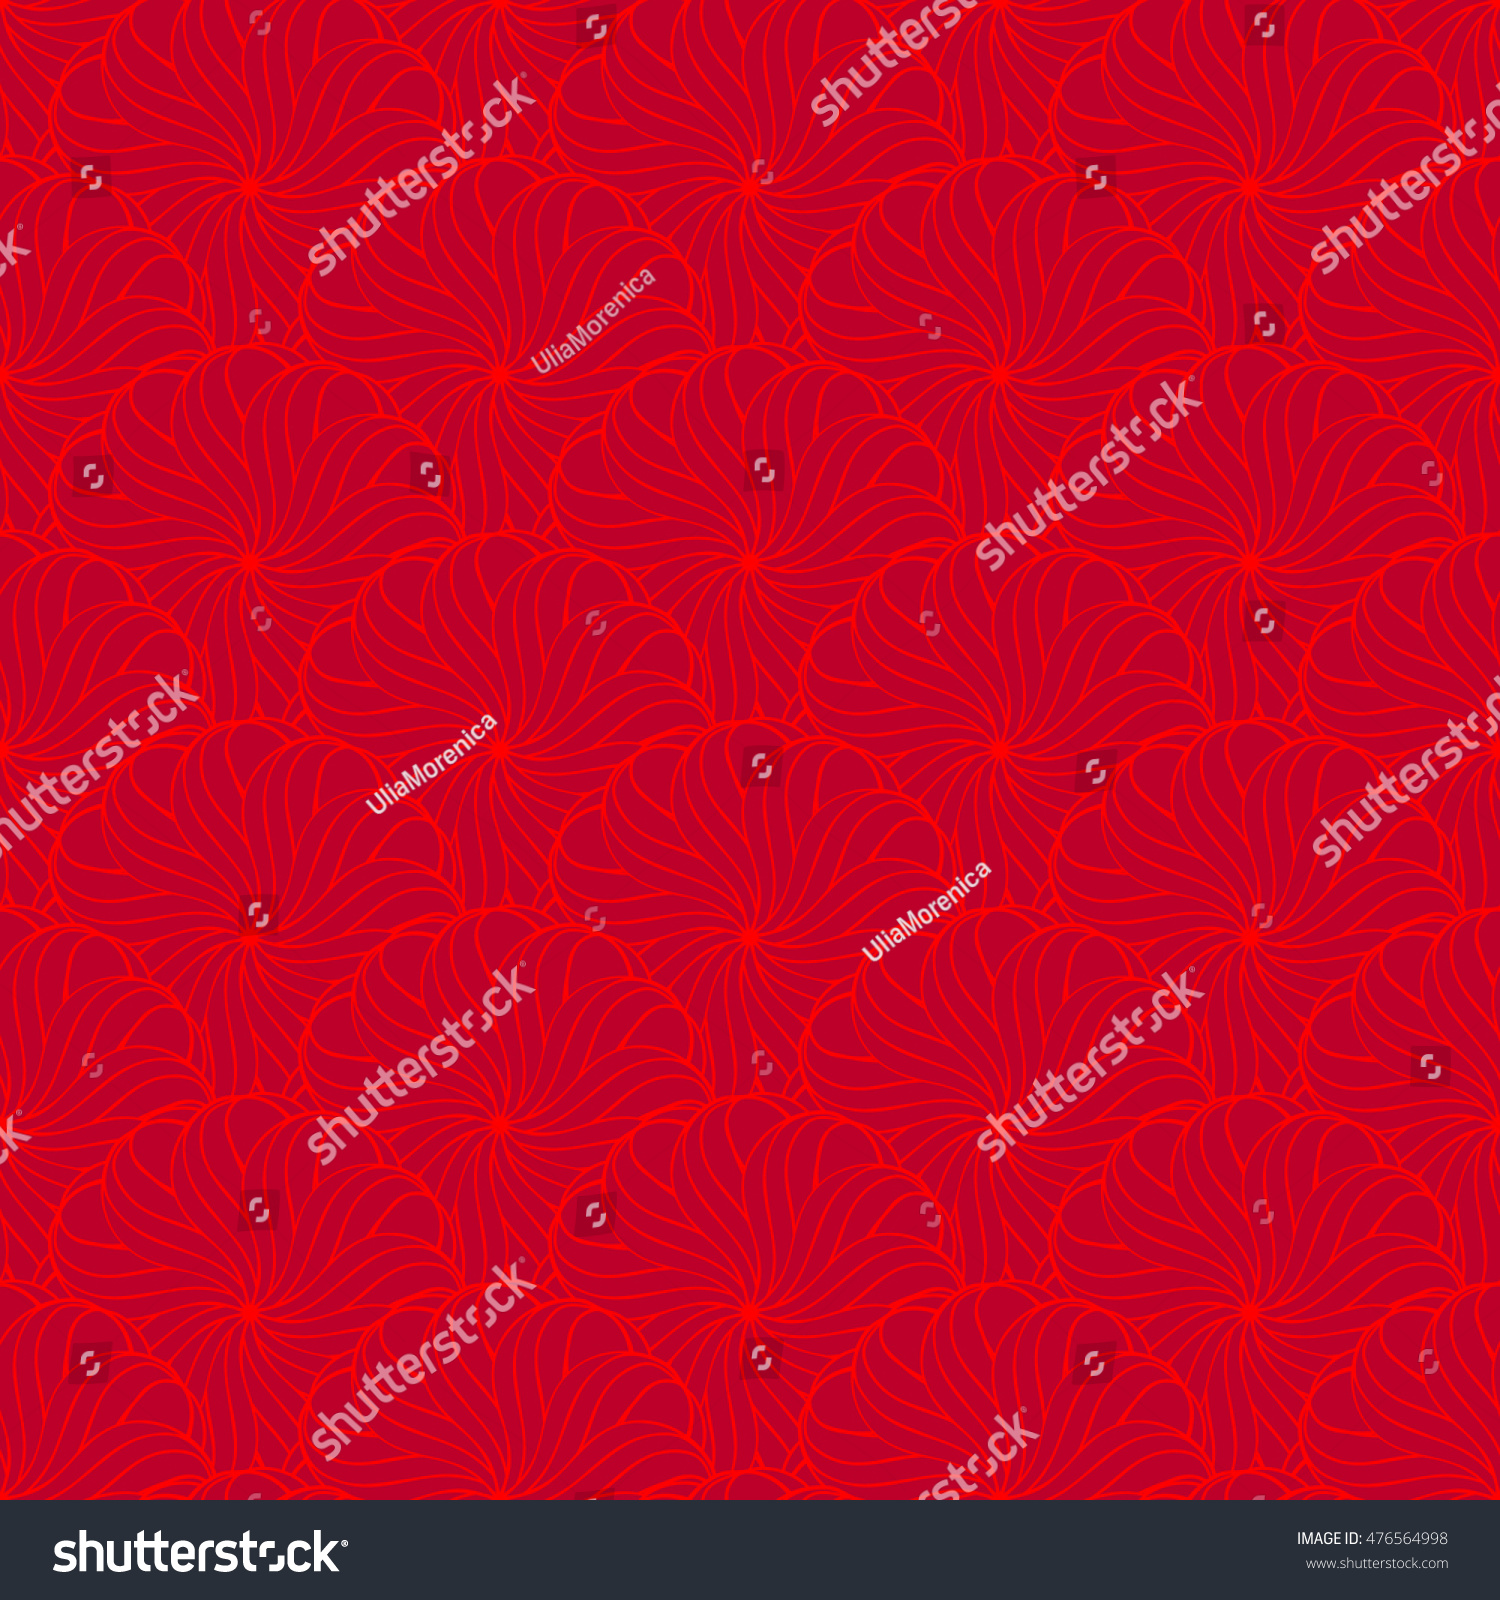 Seamless creative hand-drawn pattern of stylized flowers. Vector illustration. #476564998